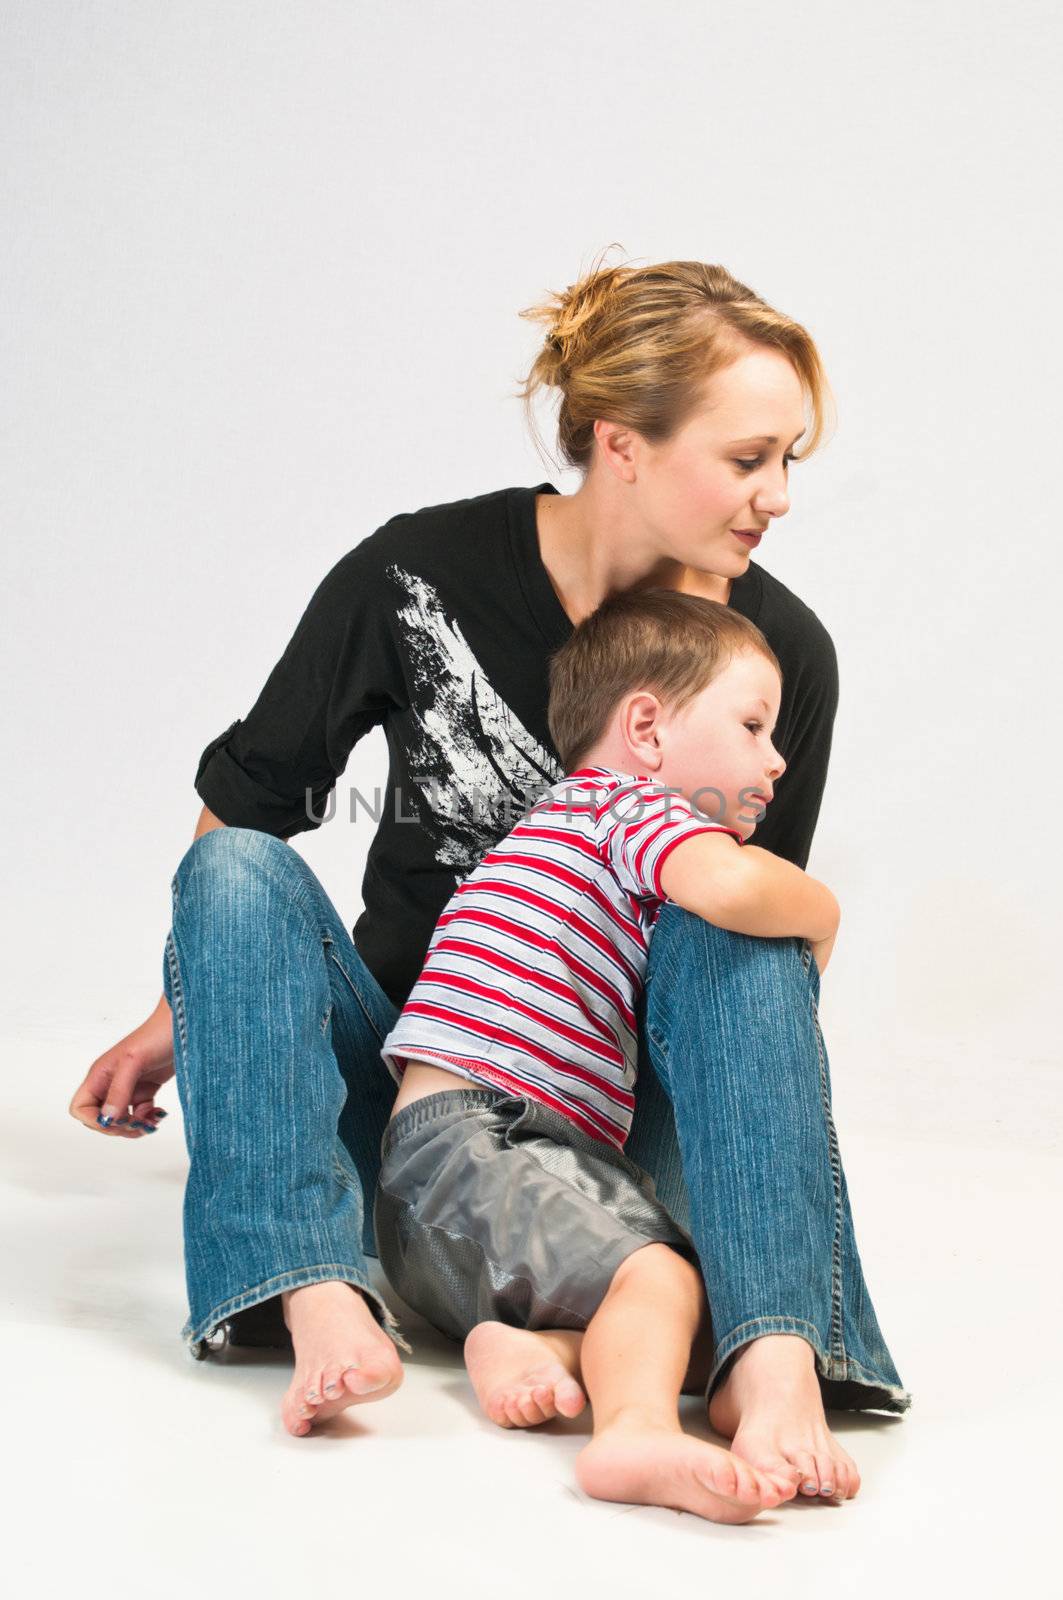 Pretty young woman with her son looking to her left while seated on the floor